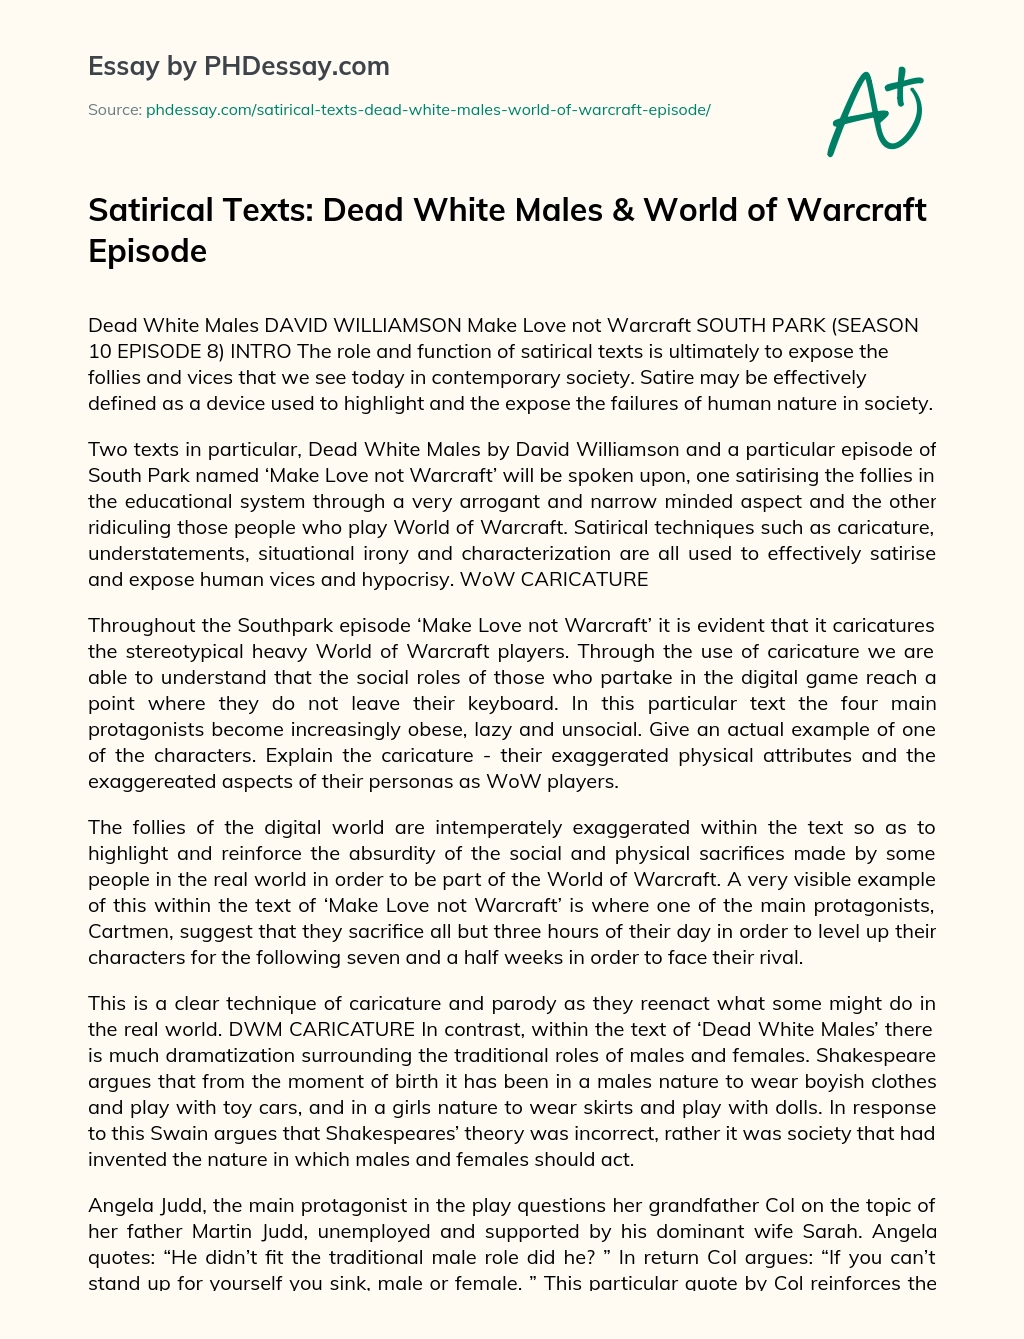 Dead White Males & World of Warcraft Episode of South Park essay